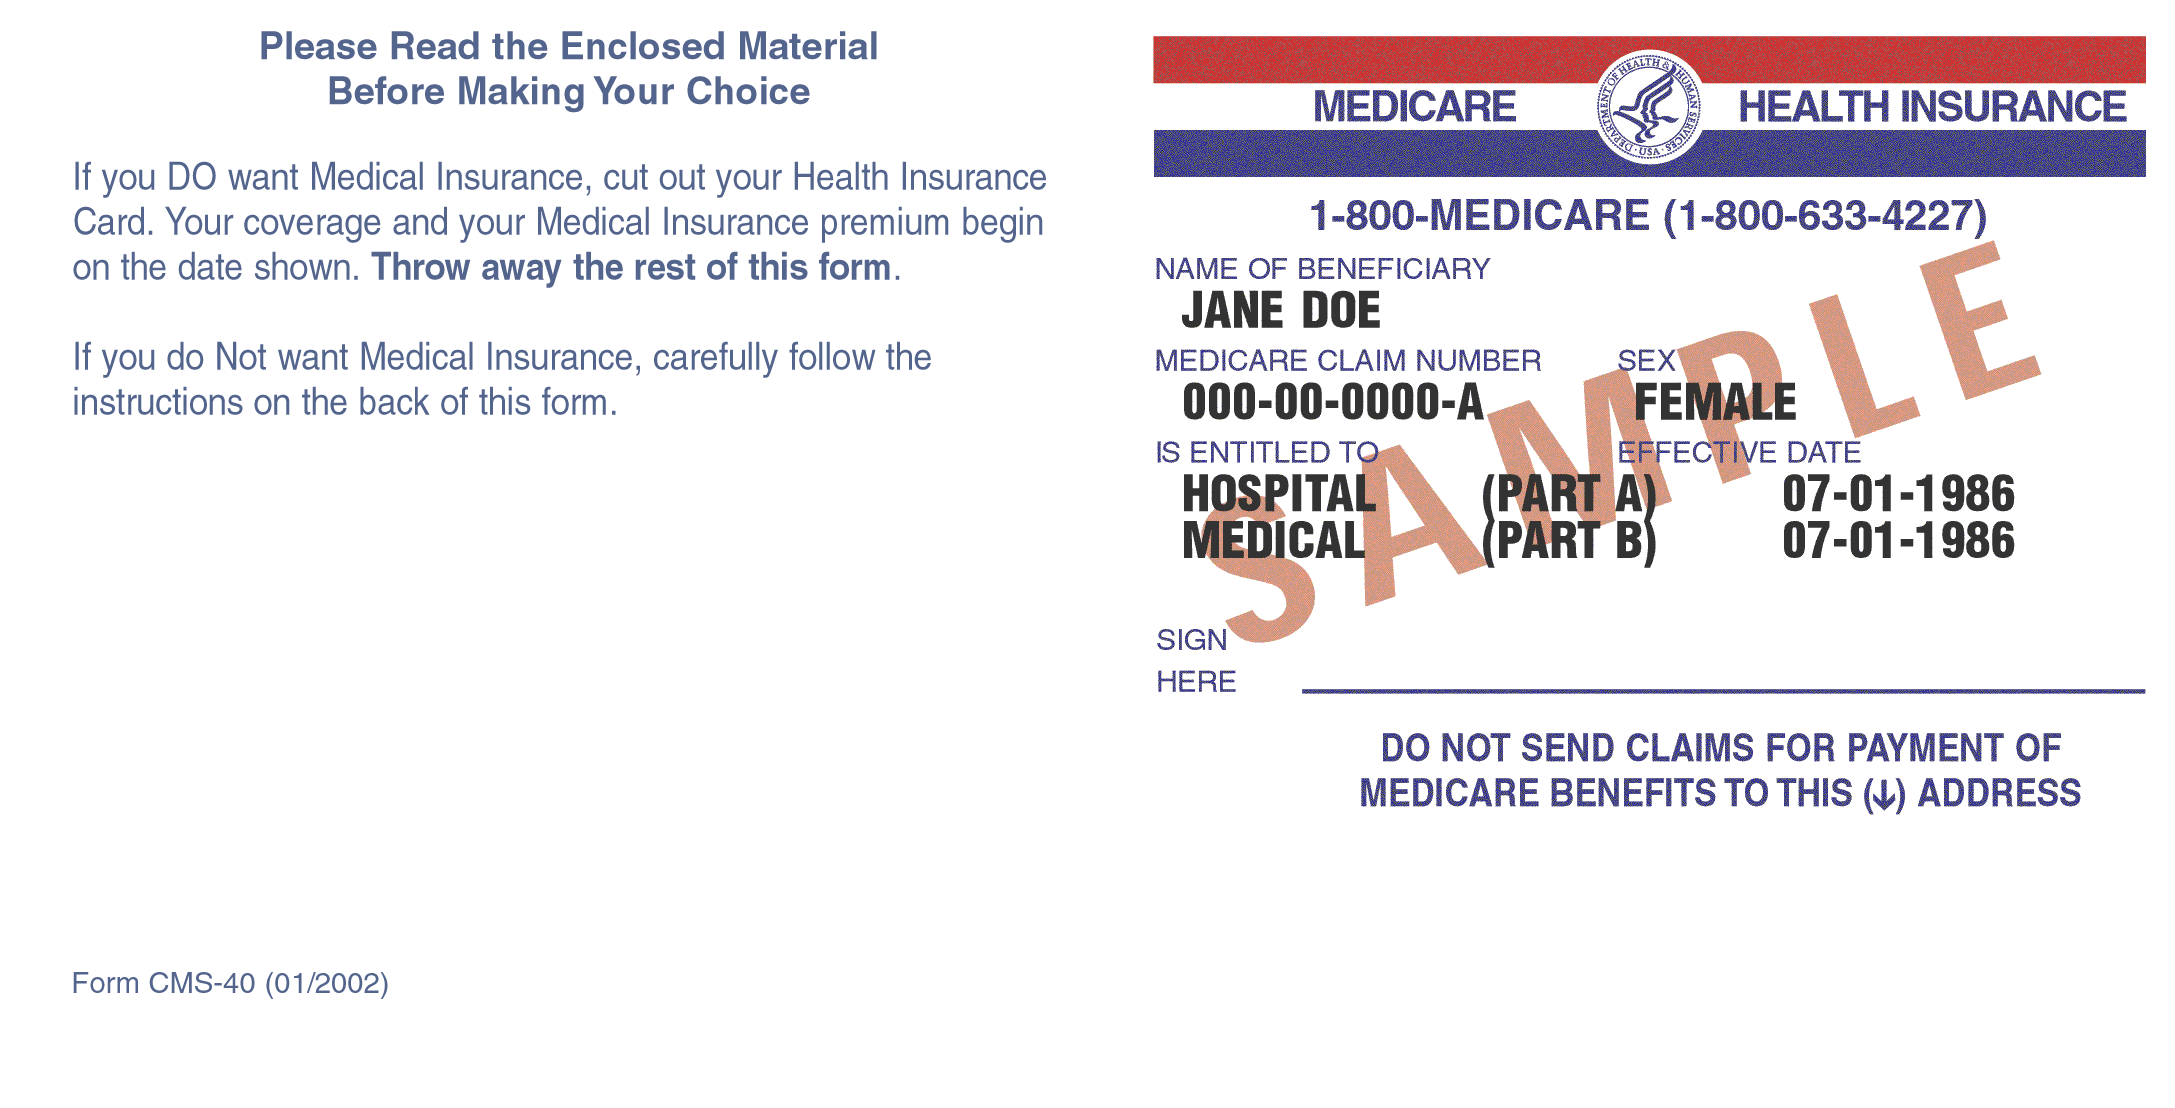 Link To Medicare Card Front View Image